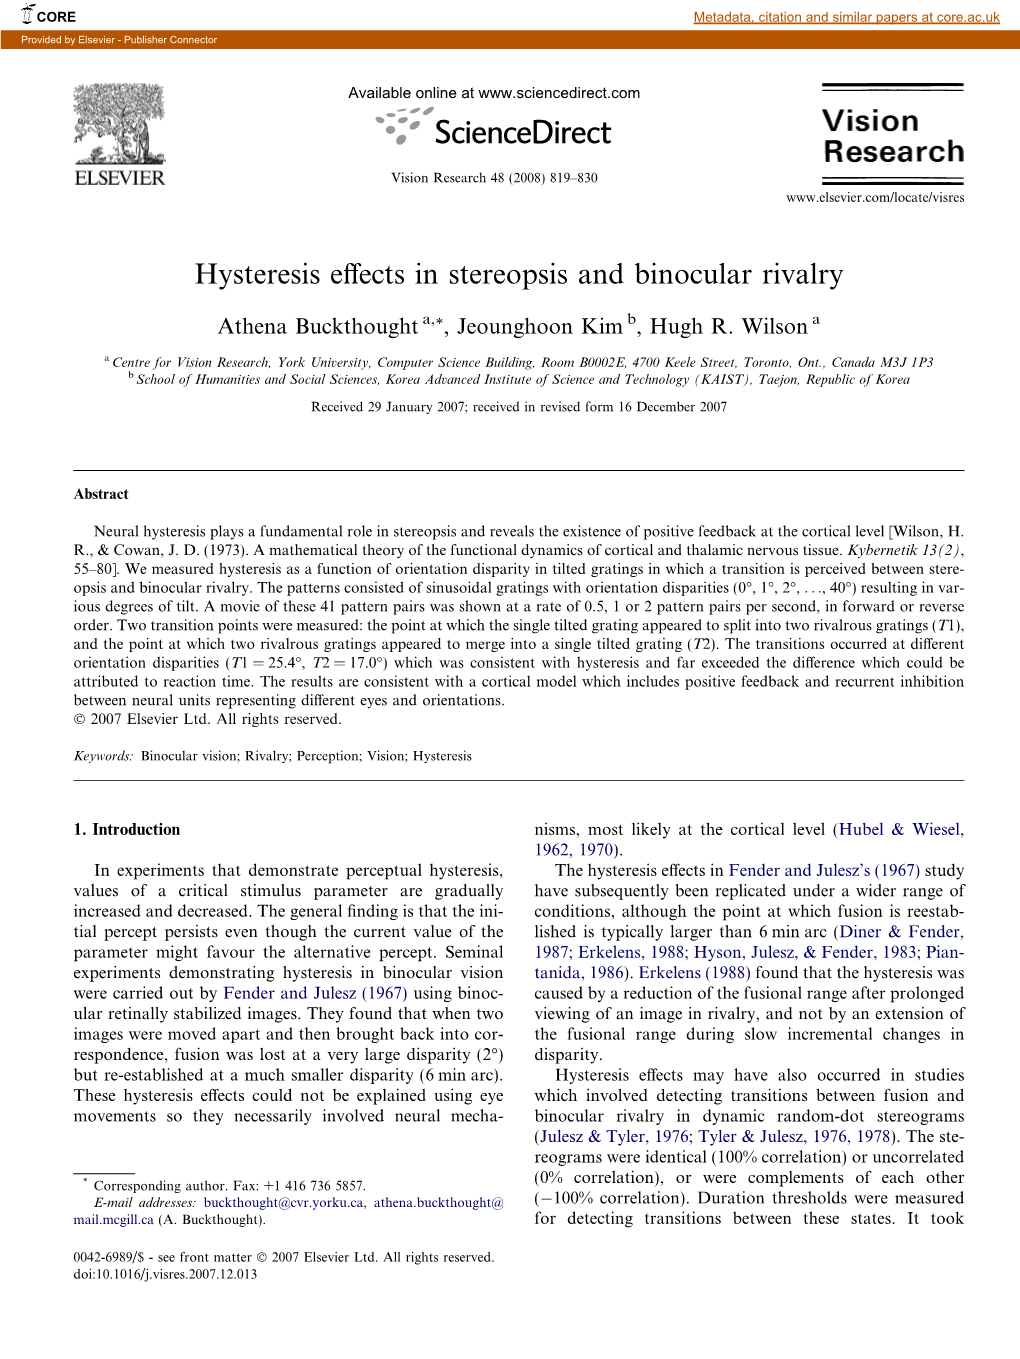 Hysteresis Effects in Stereopsis and Binocular Rivalry